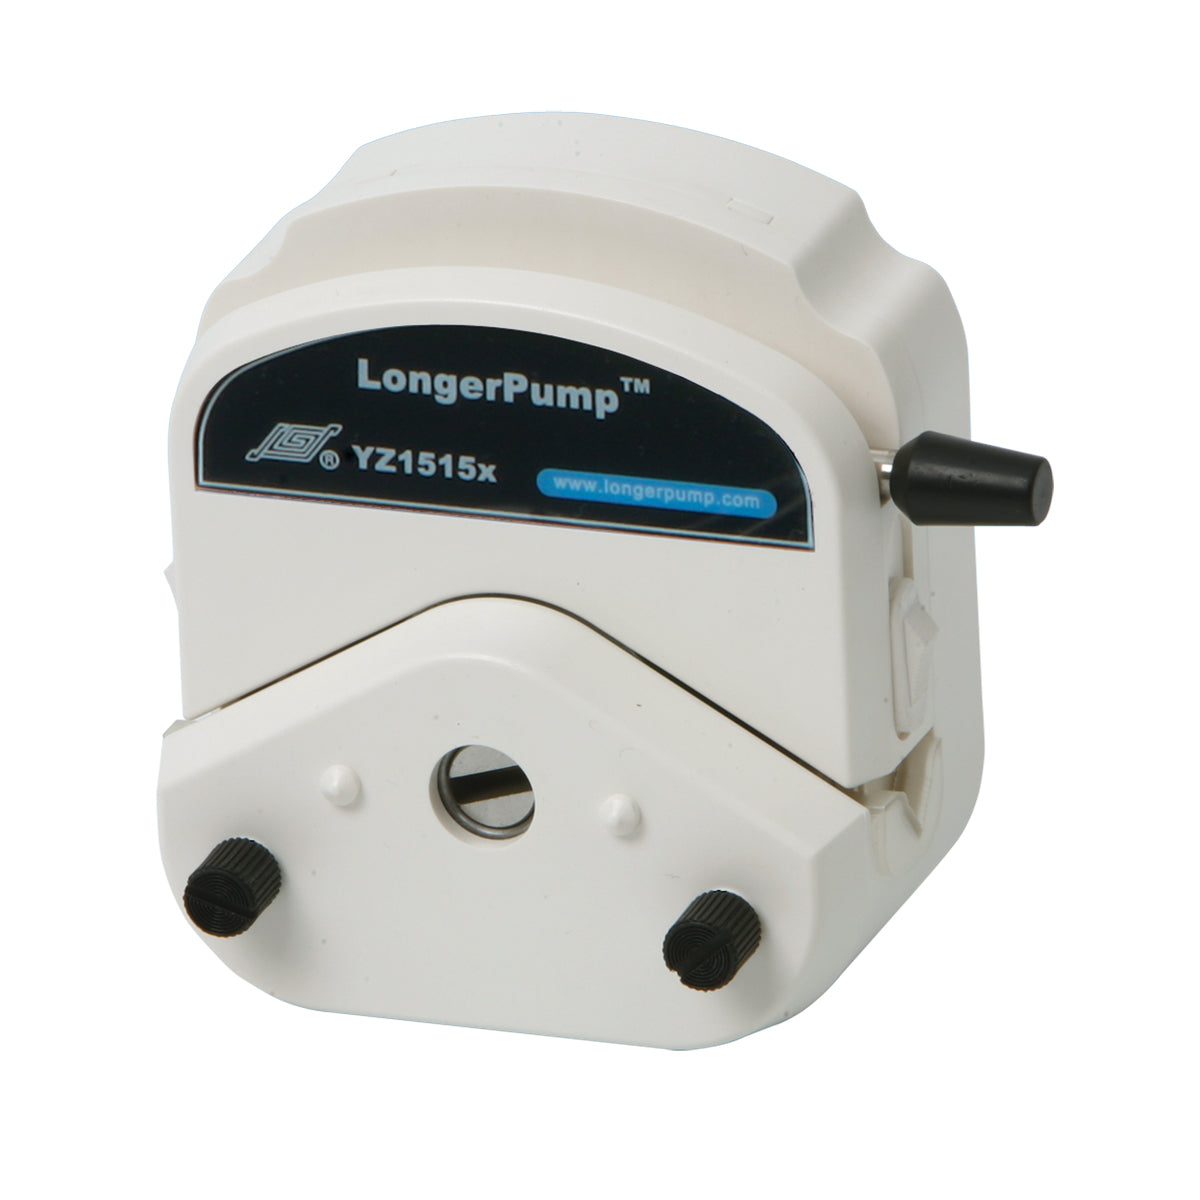 YZII25 Easy-load Peristaltic Pump Head and Tubing---C